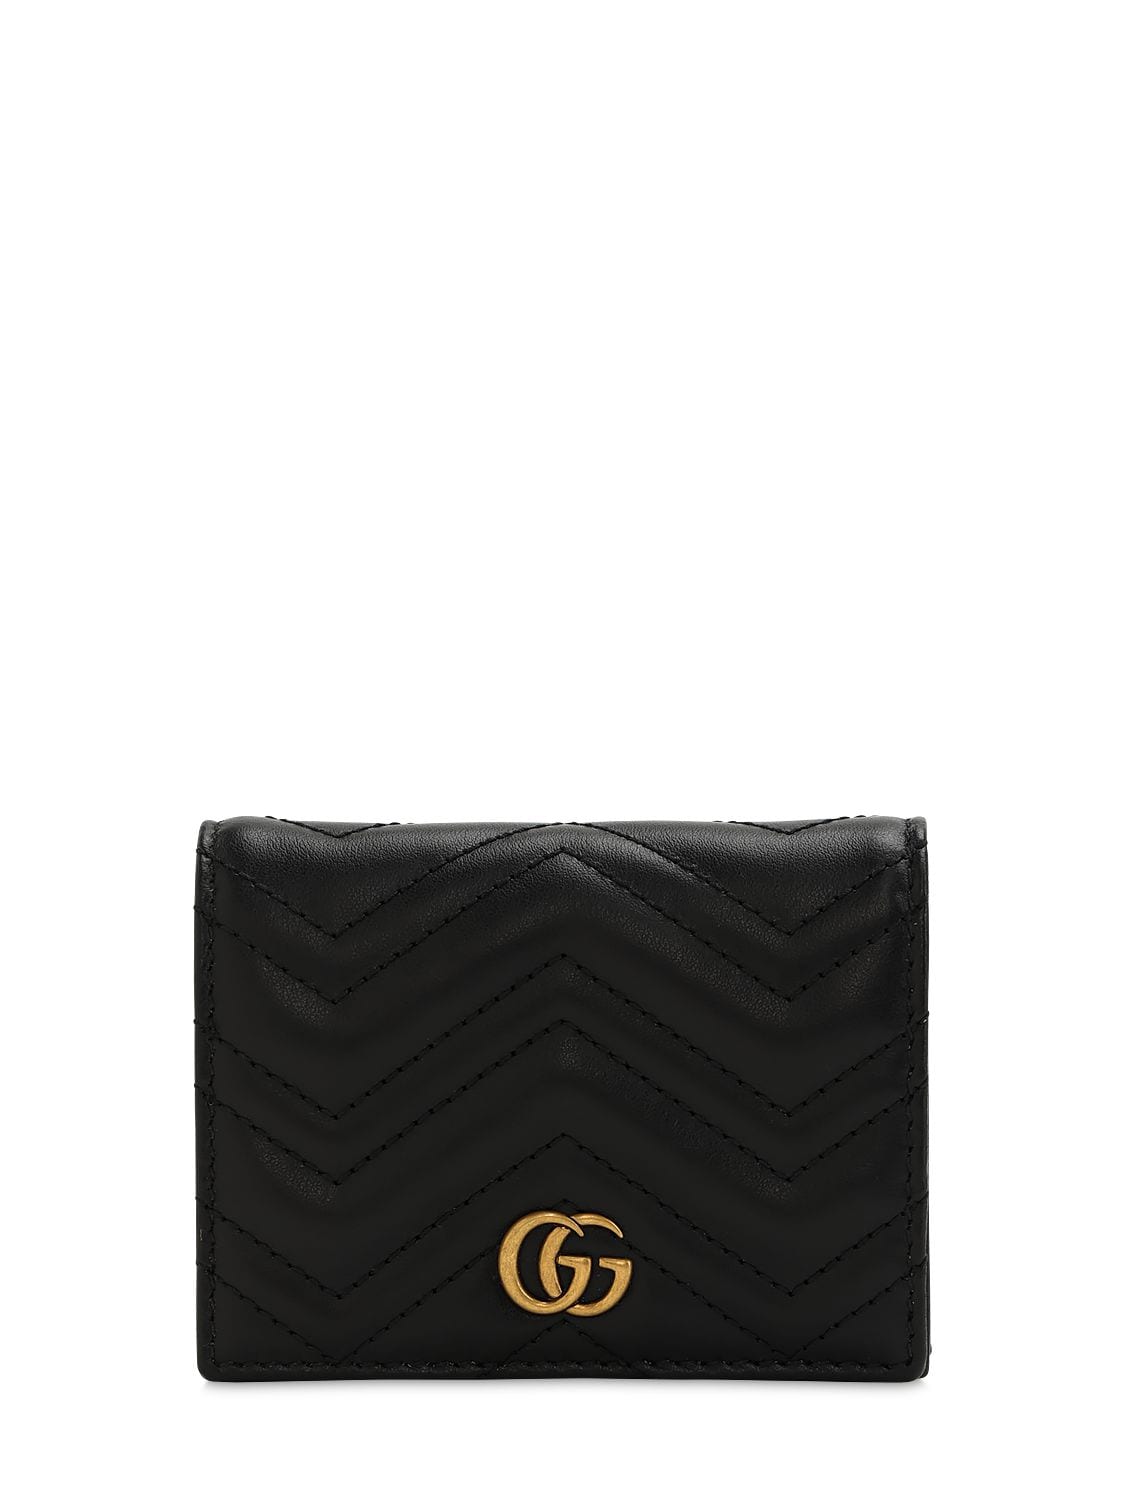 Gg Marmont 2.0 Leather Wallet Luisaviaroma Women Accessories Bags Wallets 